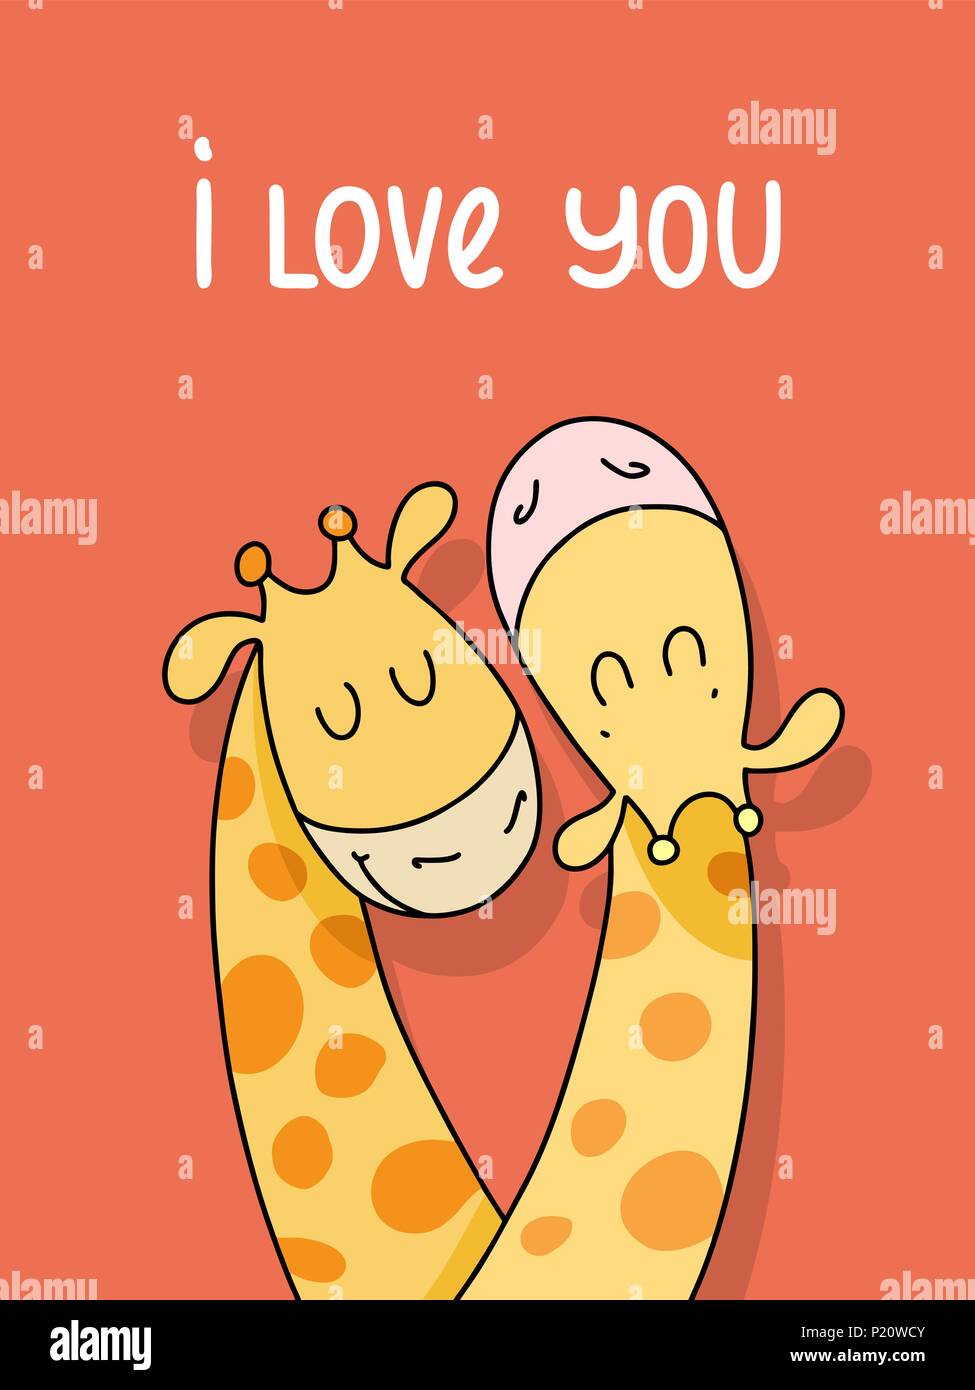 Top Cute Cartoon I Love You Images - friend quotes